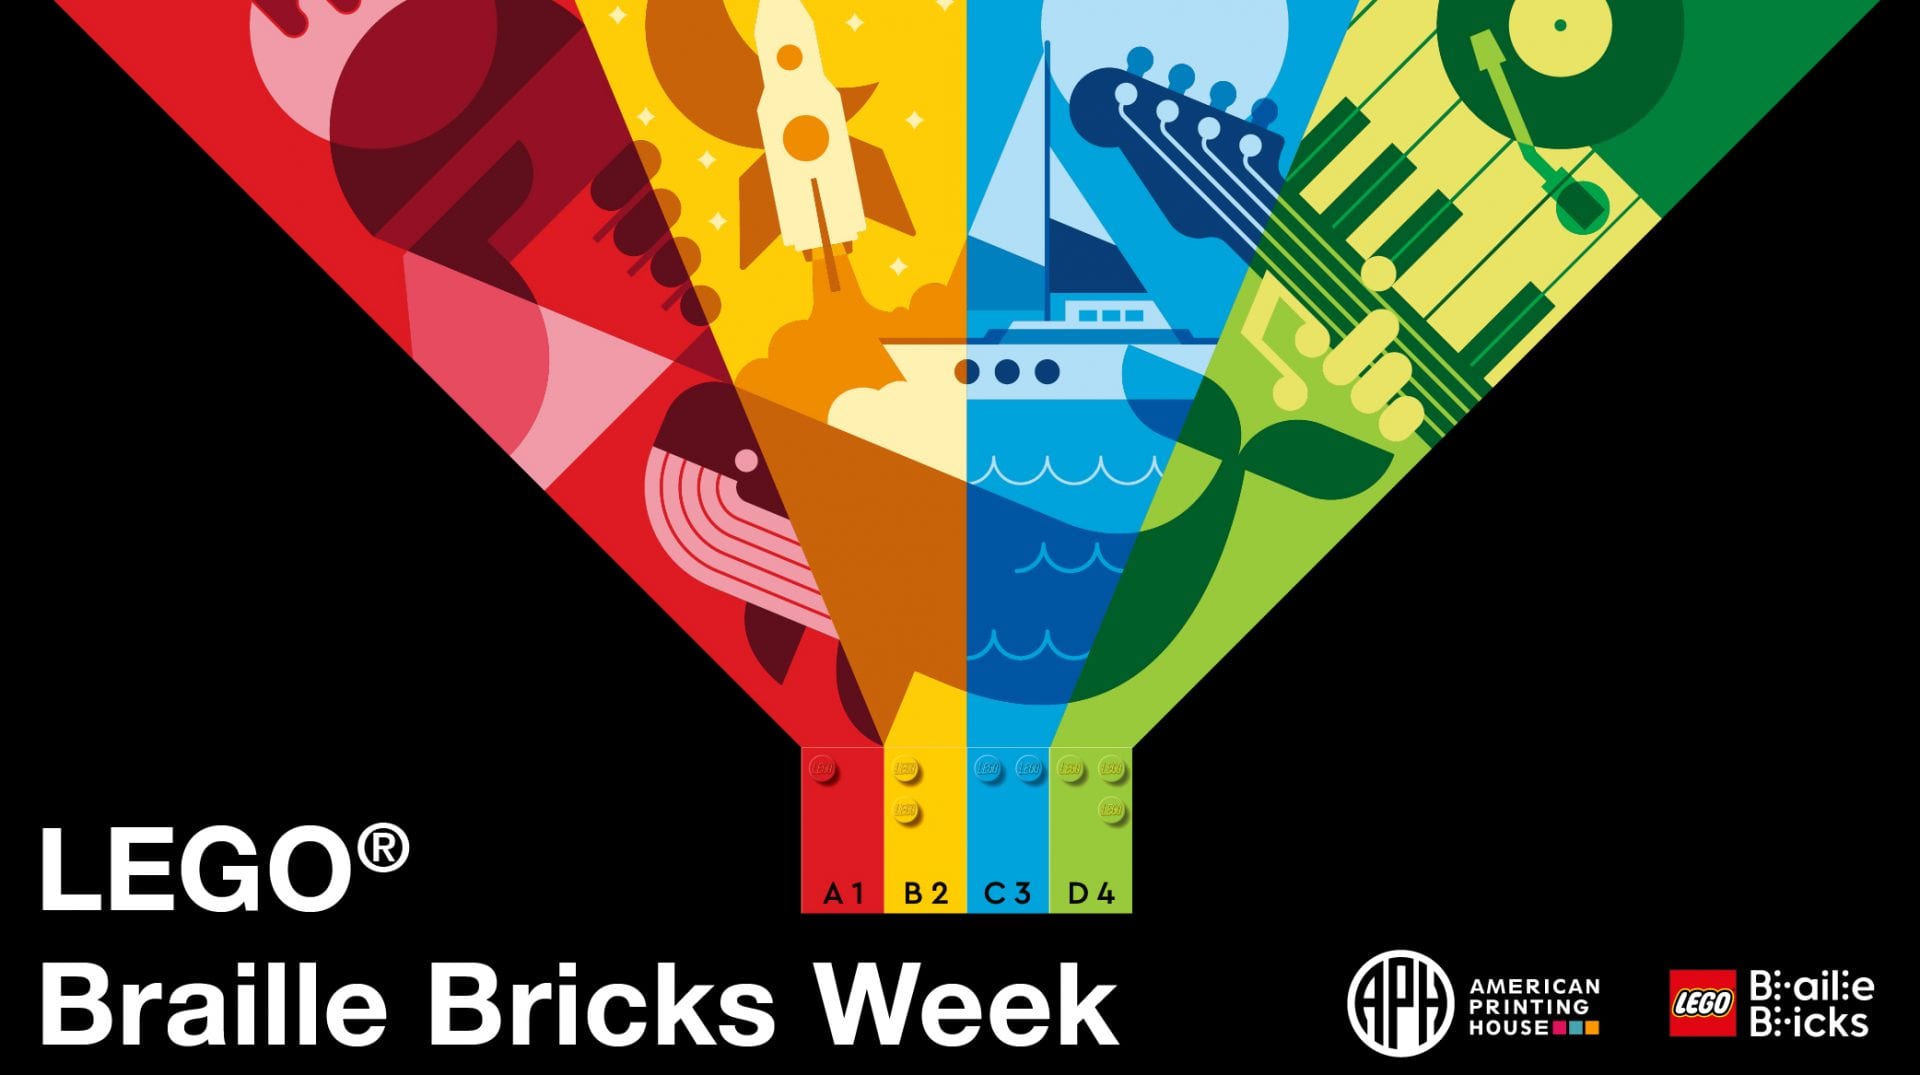 a design consisting of 4 LEGO braille bricks in red, yellow, blue, and green, from the legos, rays of the corresponding colors shine out like a light house. in the rays are a variety of objects like an ice cream cone, a guitar, a whale, a sail boat, and a rocket ship. text reads "LEGO Braille Bricks Week" APH logo, LEGO Braille Bricks logo